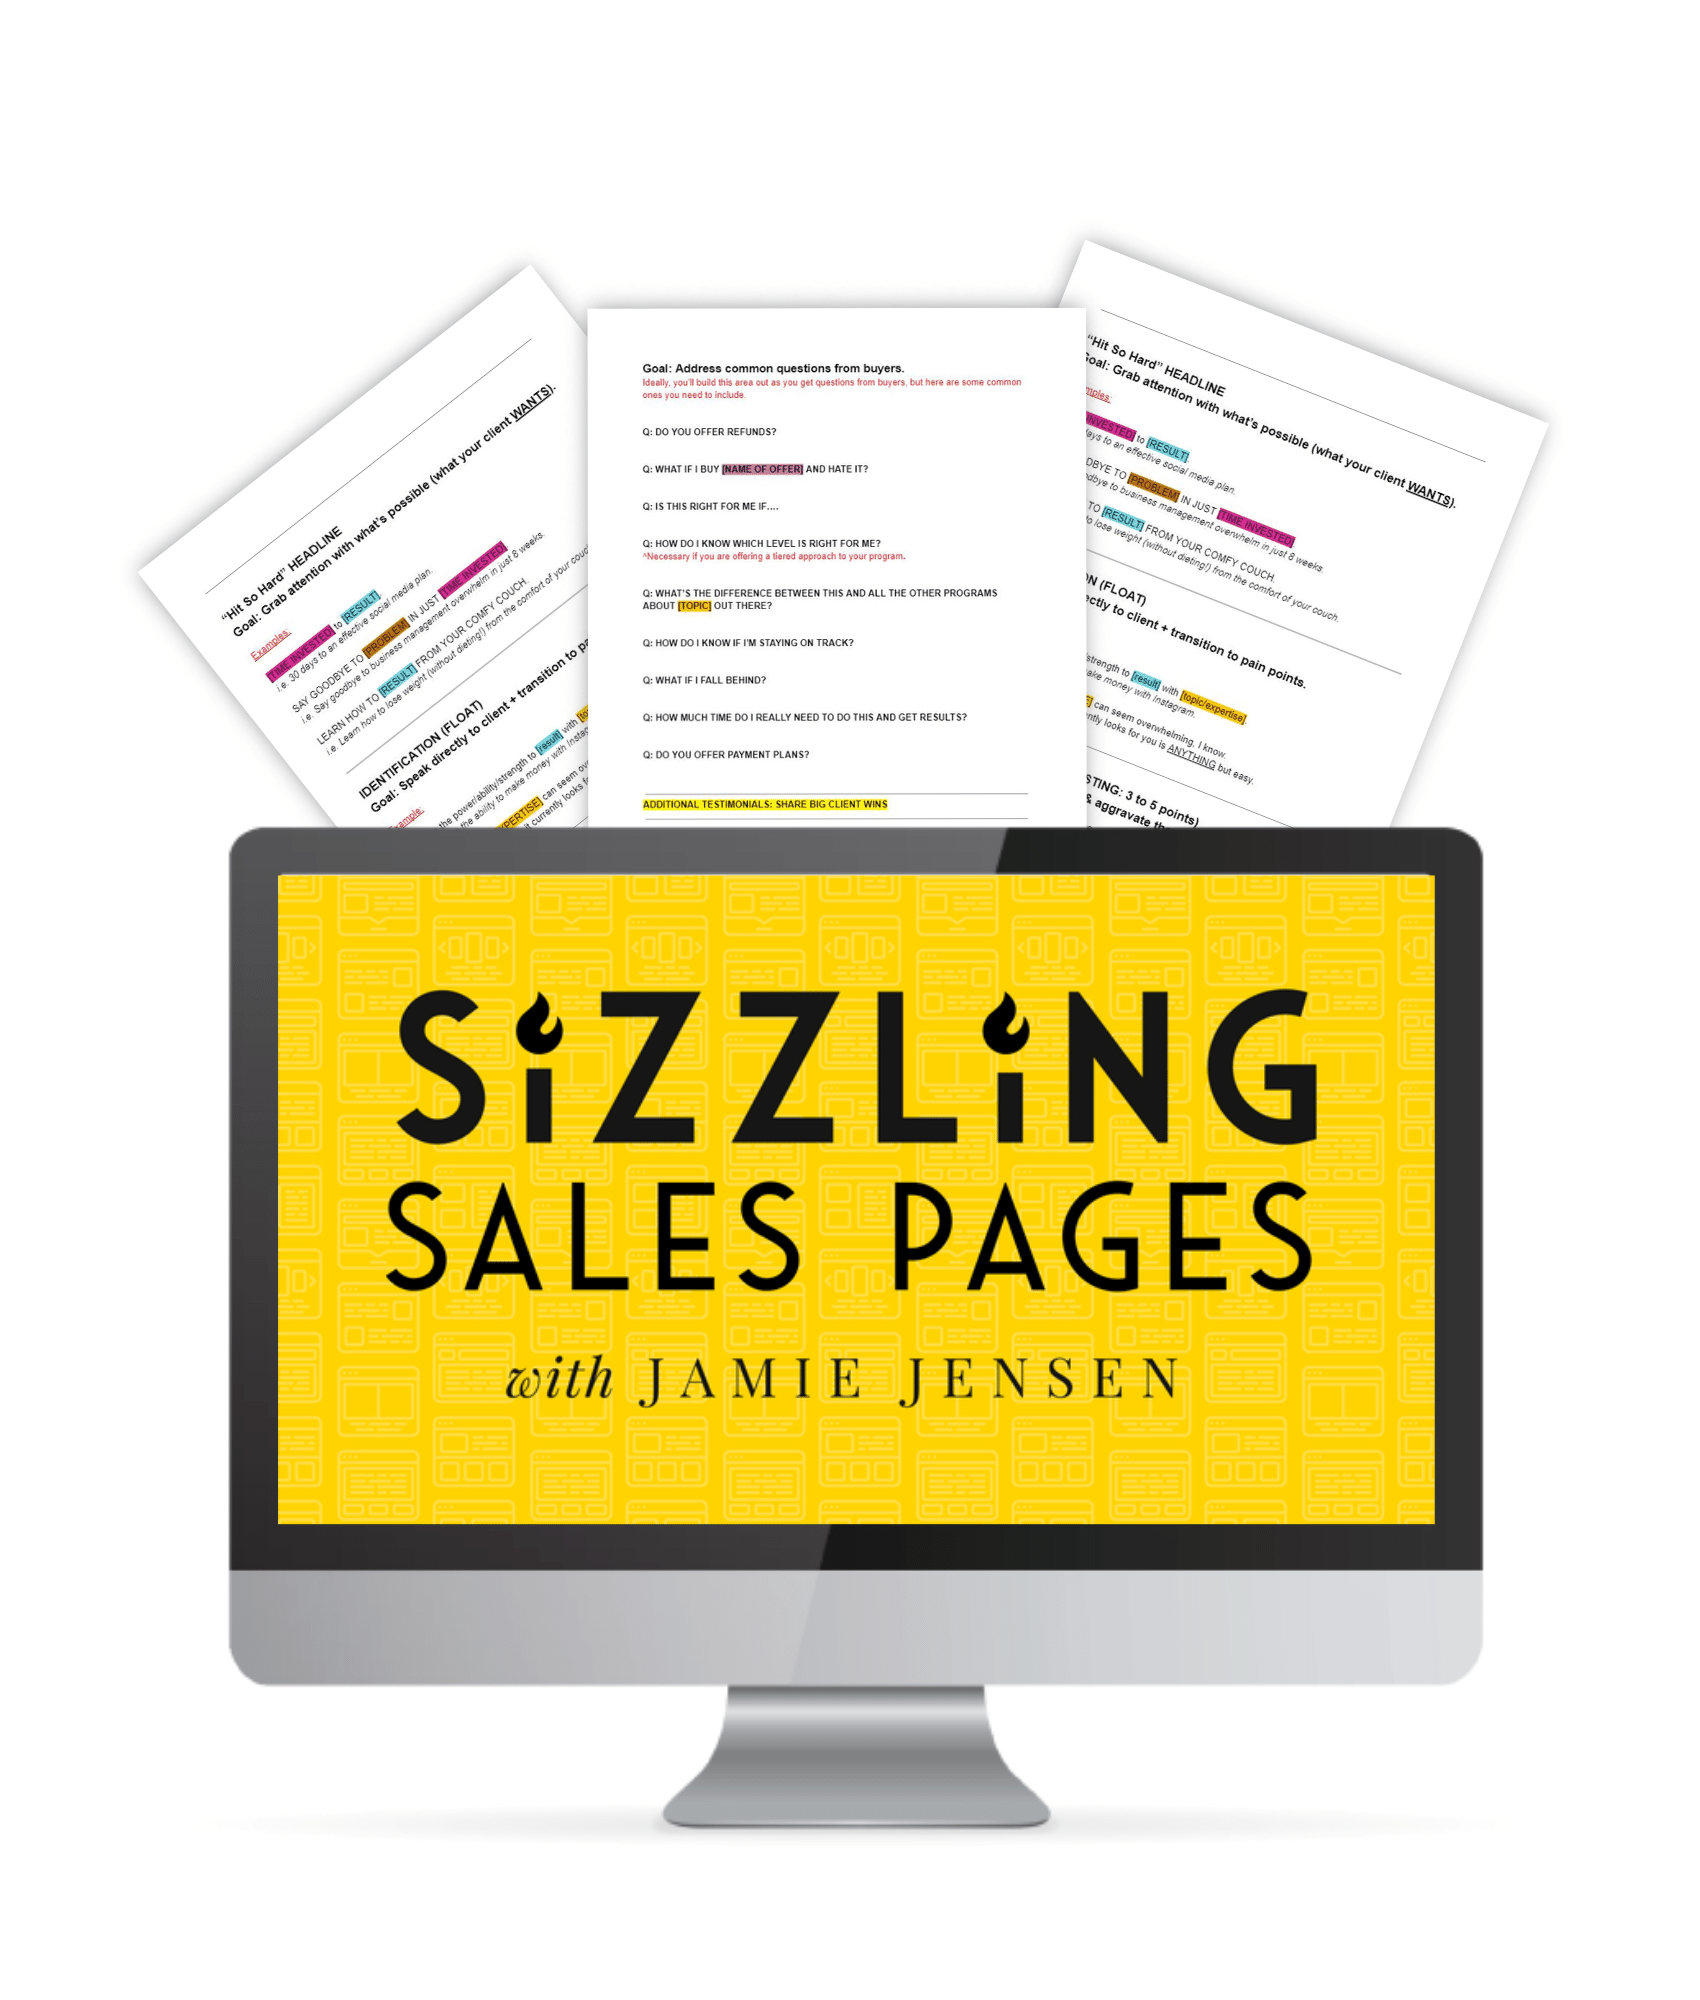 A mockup of what you get in Sizzling Sales Pages